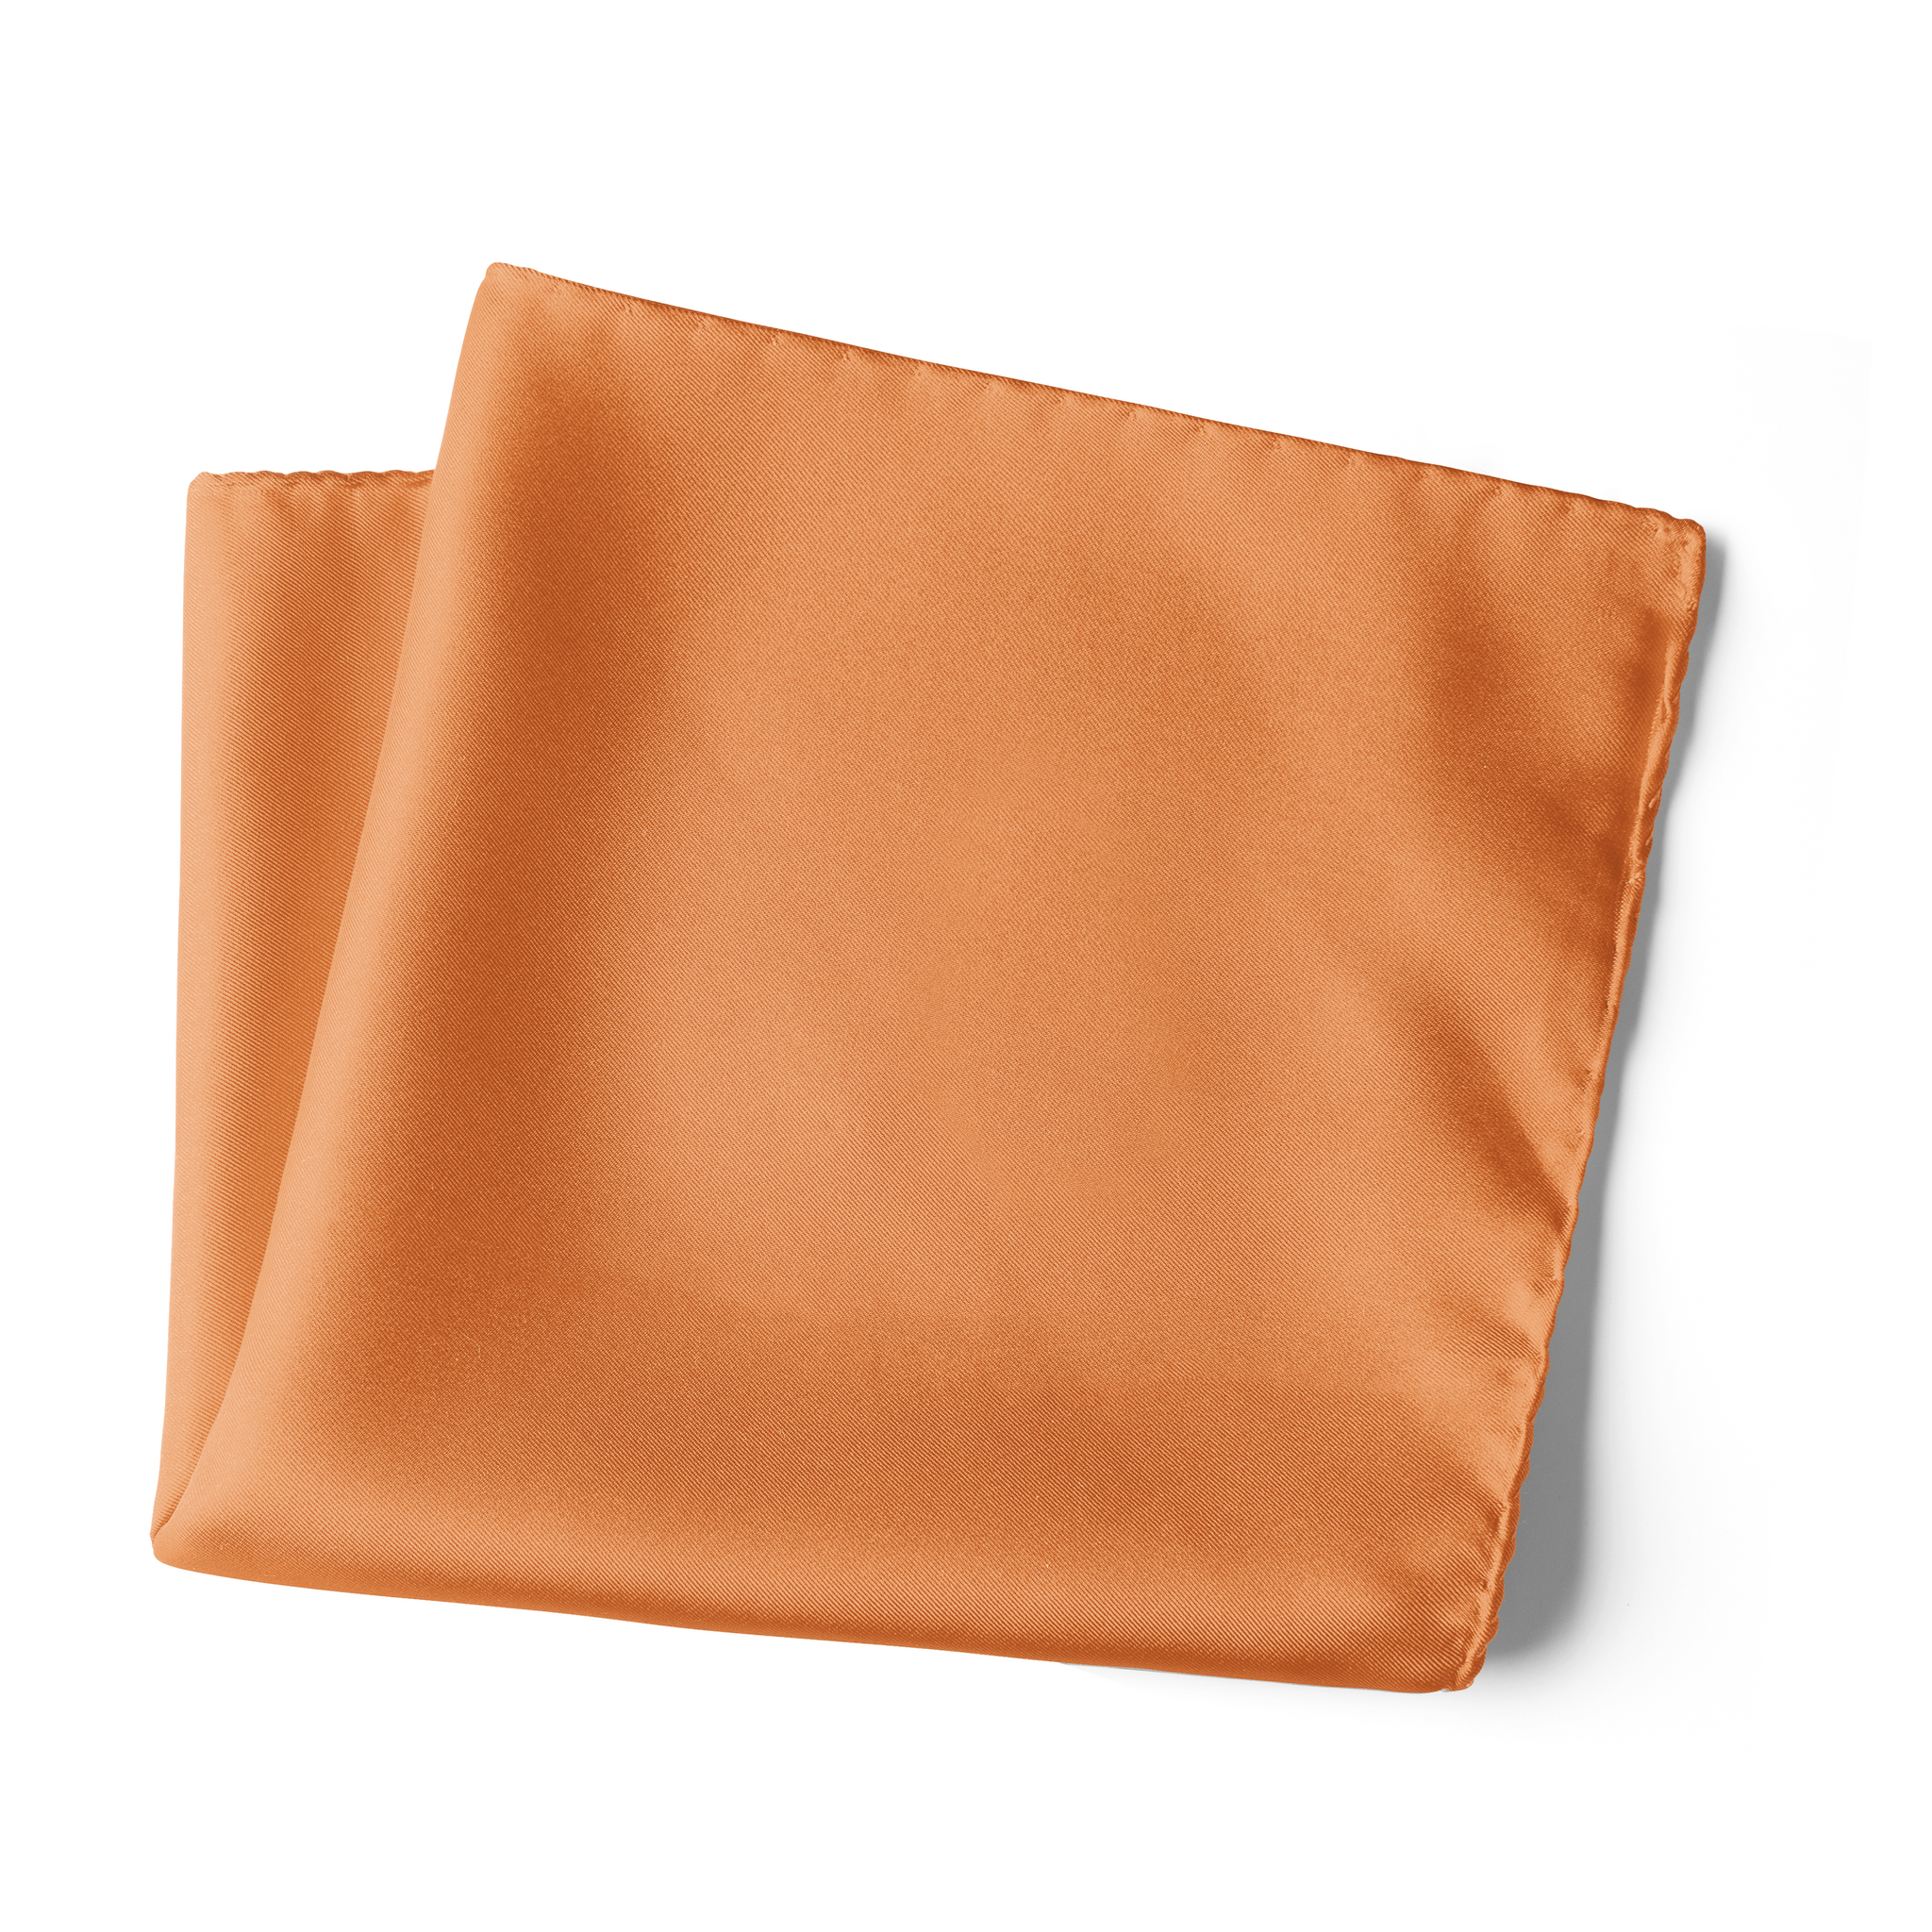 Chokore Rust Colour Pure Silk Pocket Square, from the Solids Line